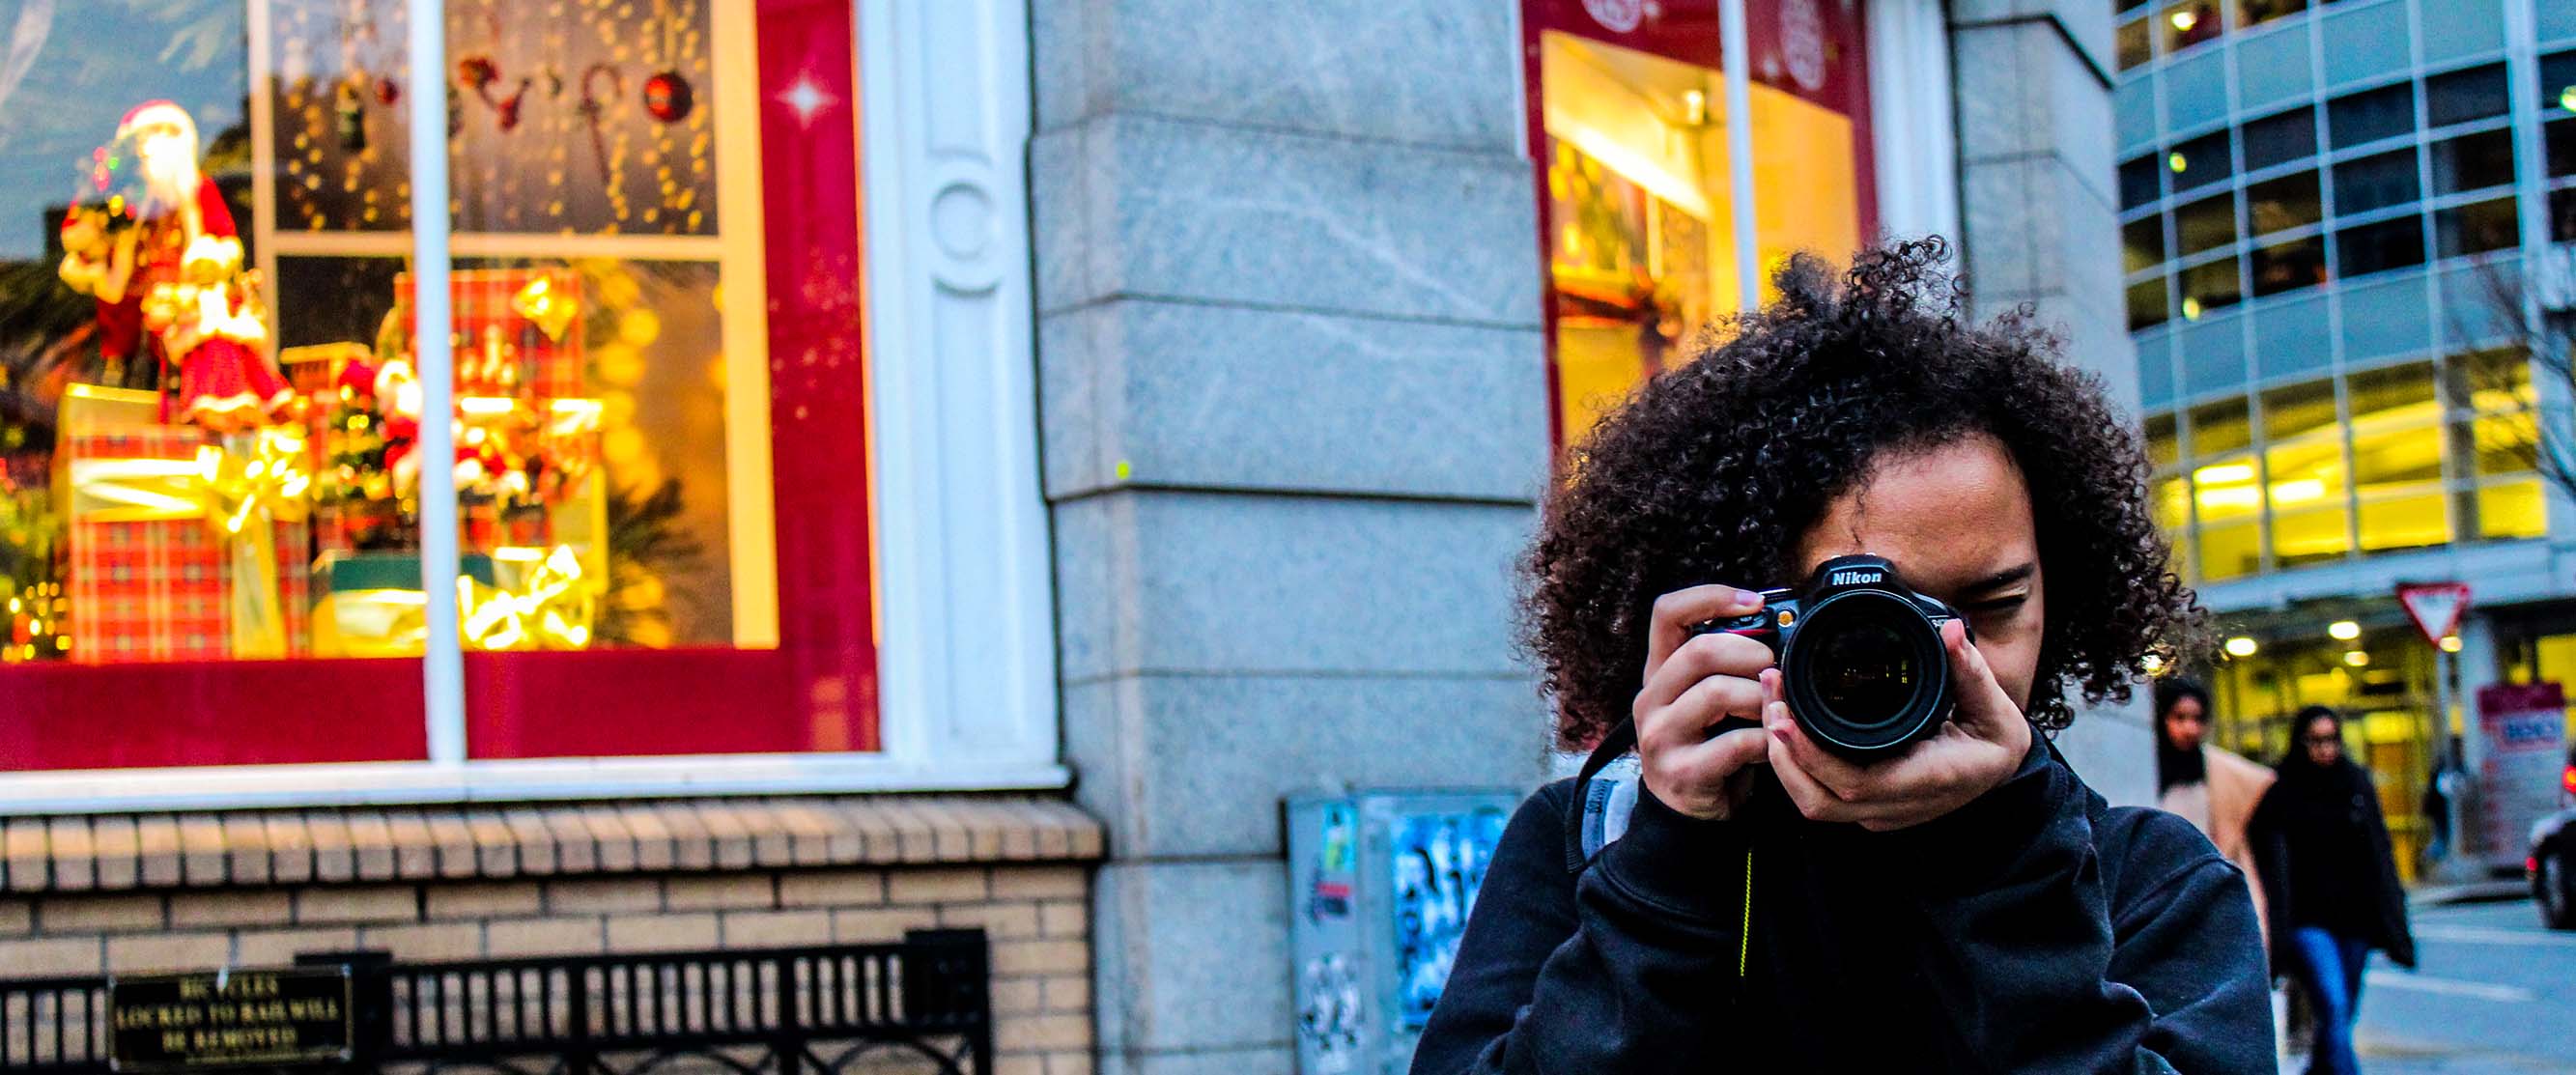 student taking a photo in front a Christmas window display in Ireland